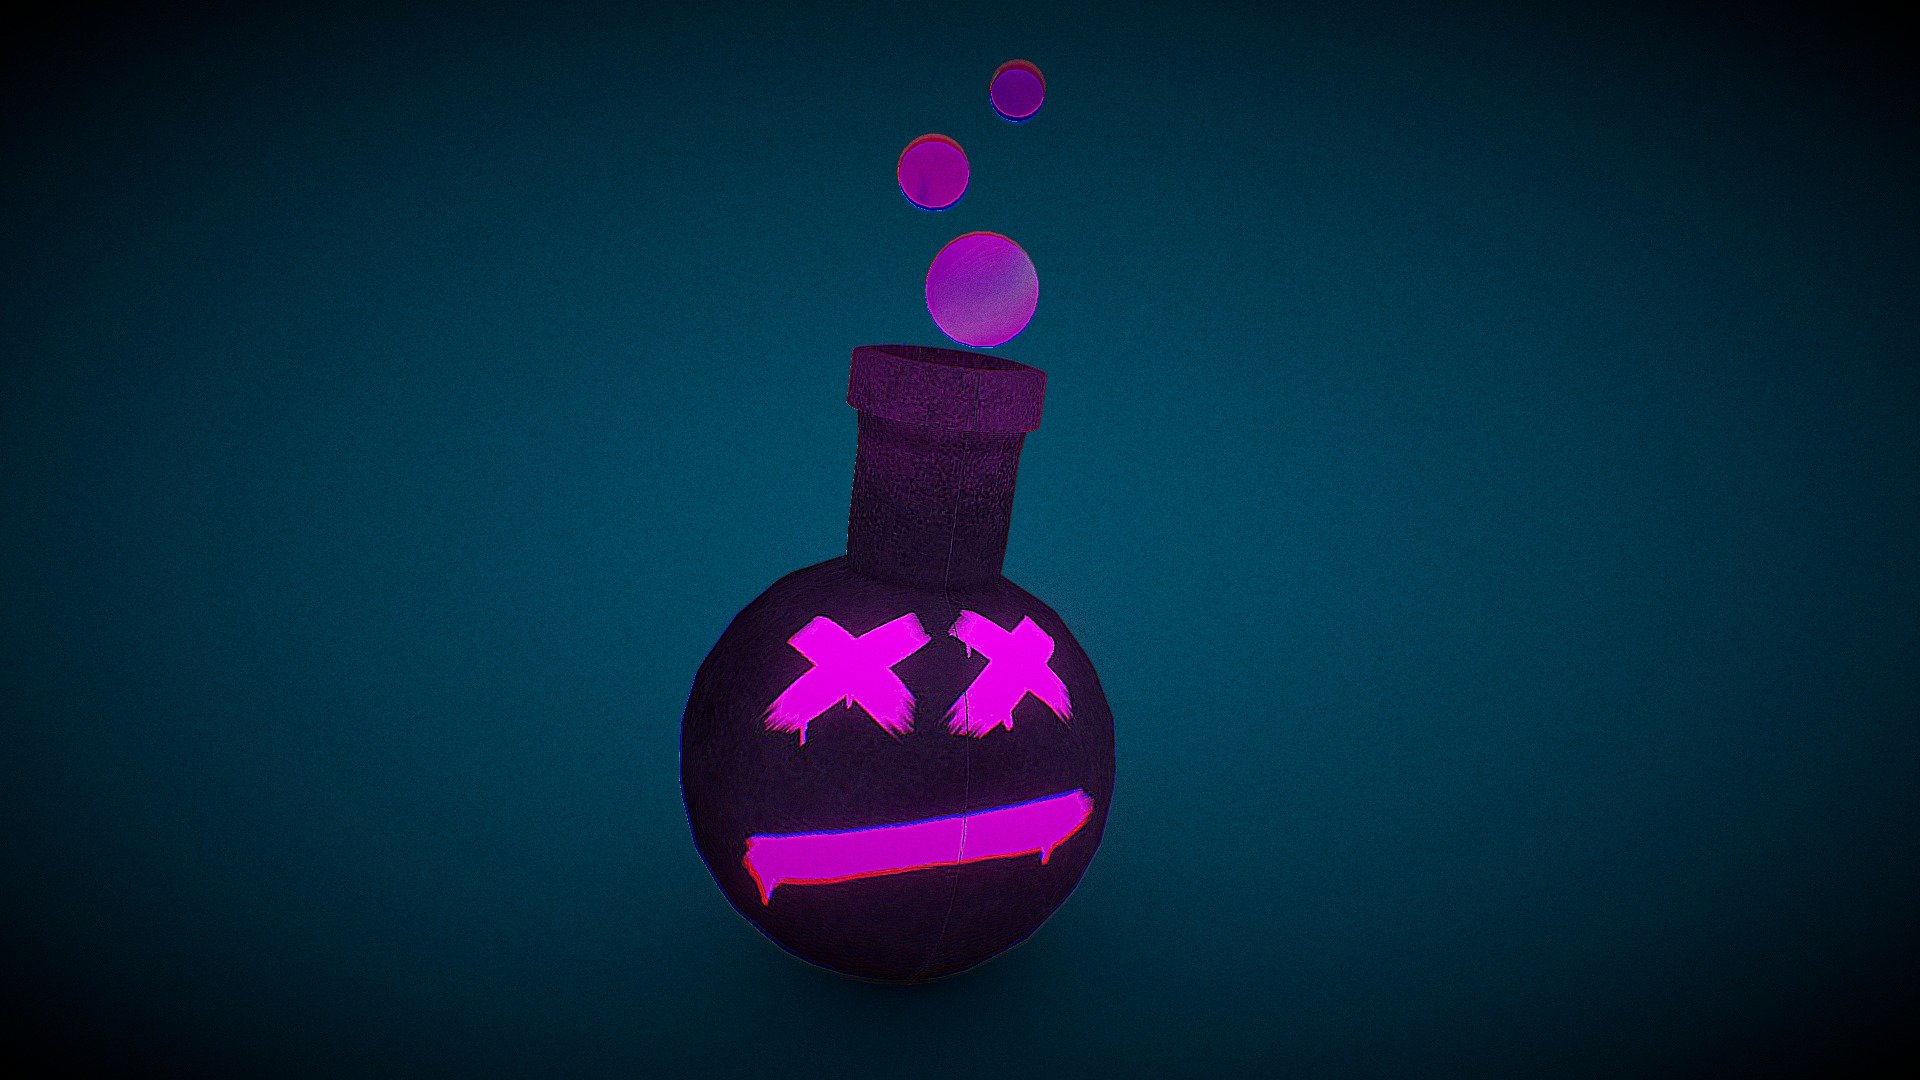 Handpainted pink cartoon potion
Made on Autodesk 3ds Max and painted on Adobe Substance Painter, this is my first 3d model entirely made by me :D.

Made for a university project 3d model